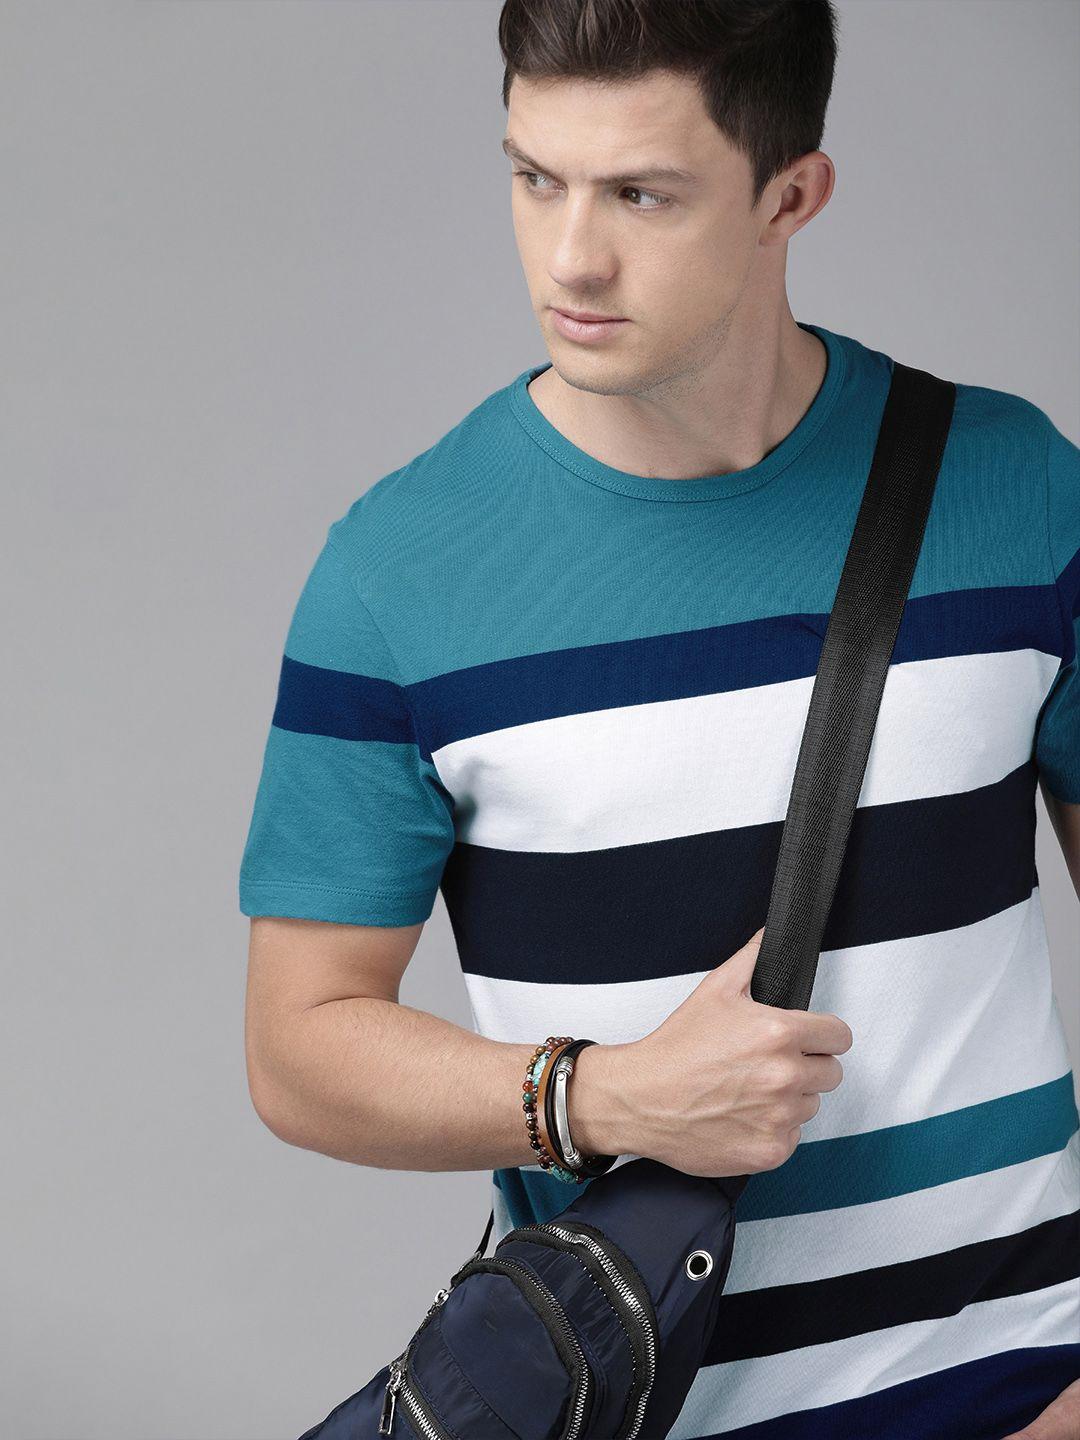 roadster men teal blue  white striped round neck pure cotton t-shirt